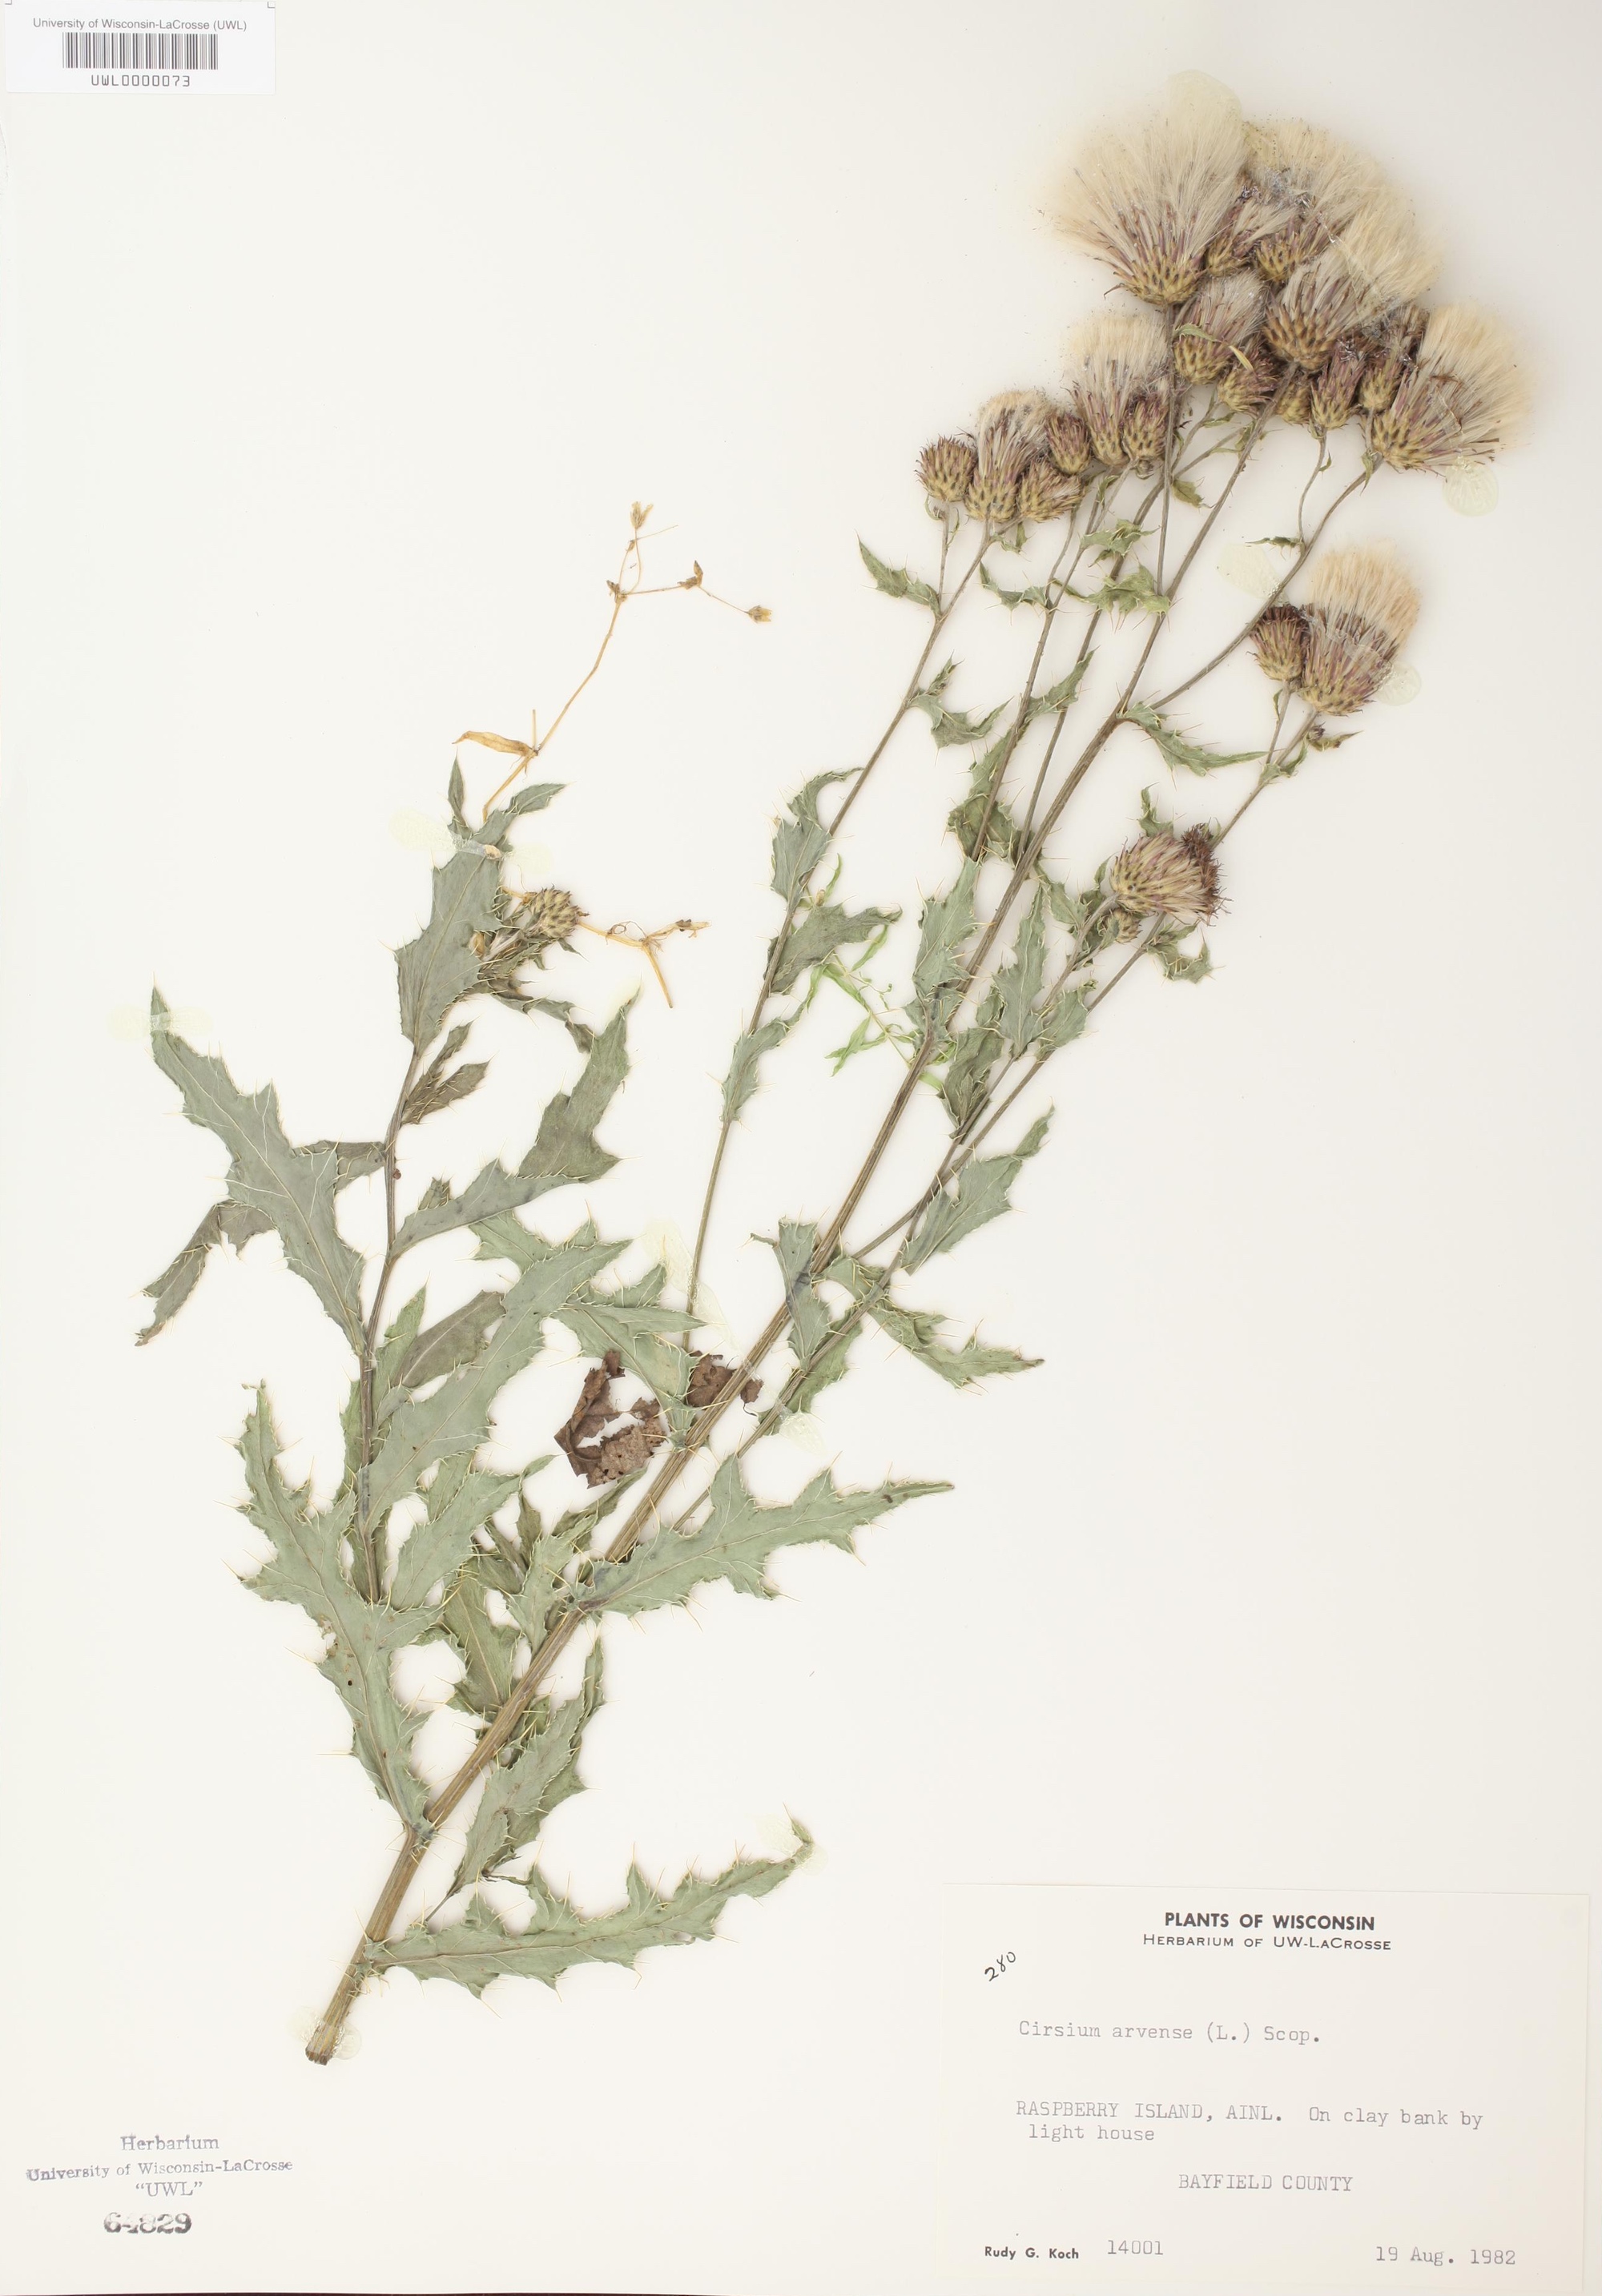 Canada Thistle specimen collected in Bayfield County, Wisconsin on Raspberry Island near Lighthouse on August 19, 1982.